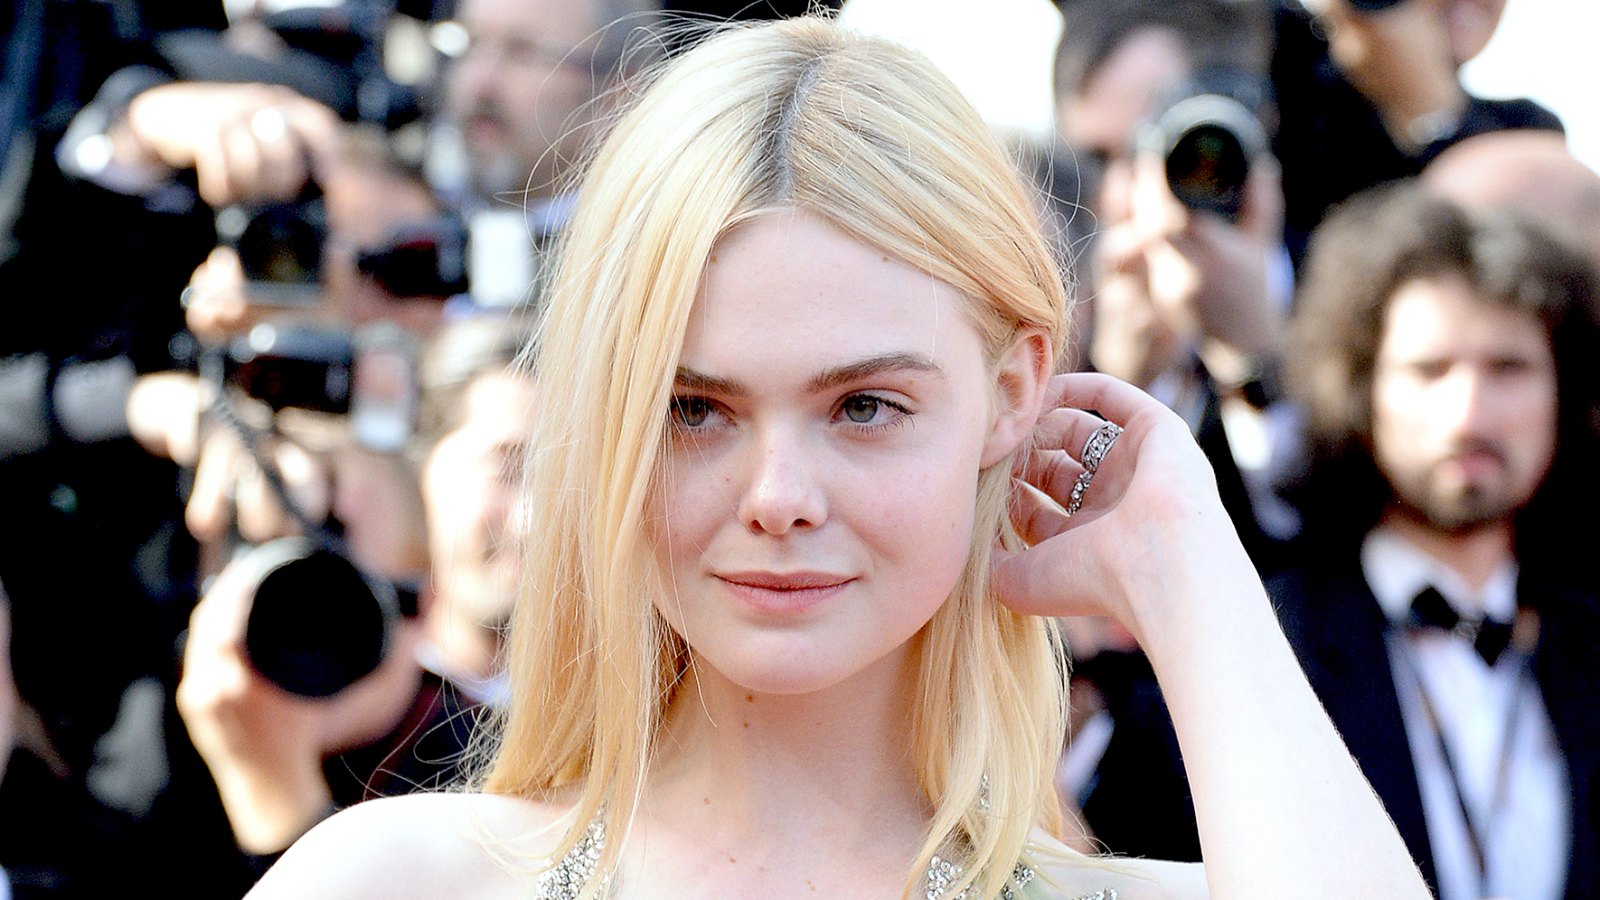 Elle Fanning departs after the "How To Talk To Girls At Parties" screening during the 70th annual Cannes Film Festival at Palais des Festivals on May 21, 2017 in Cannes, France.